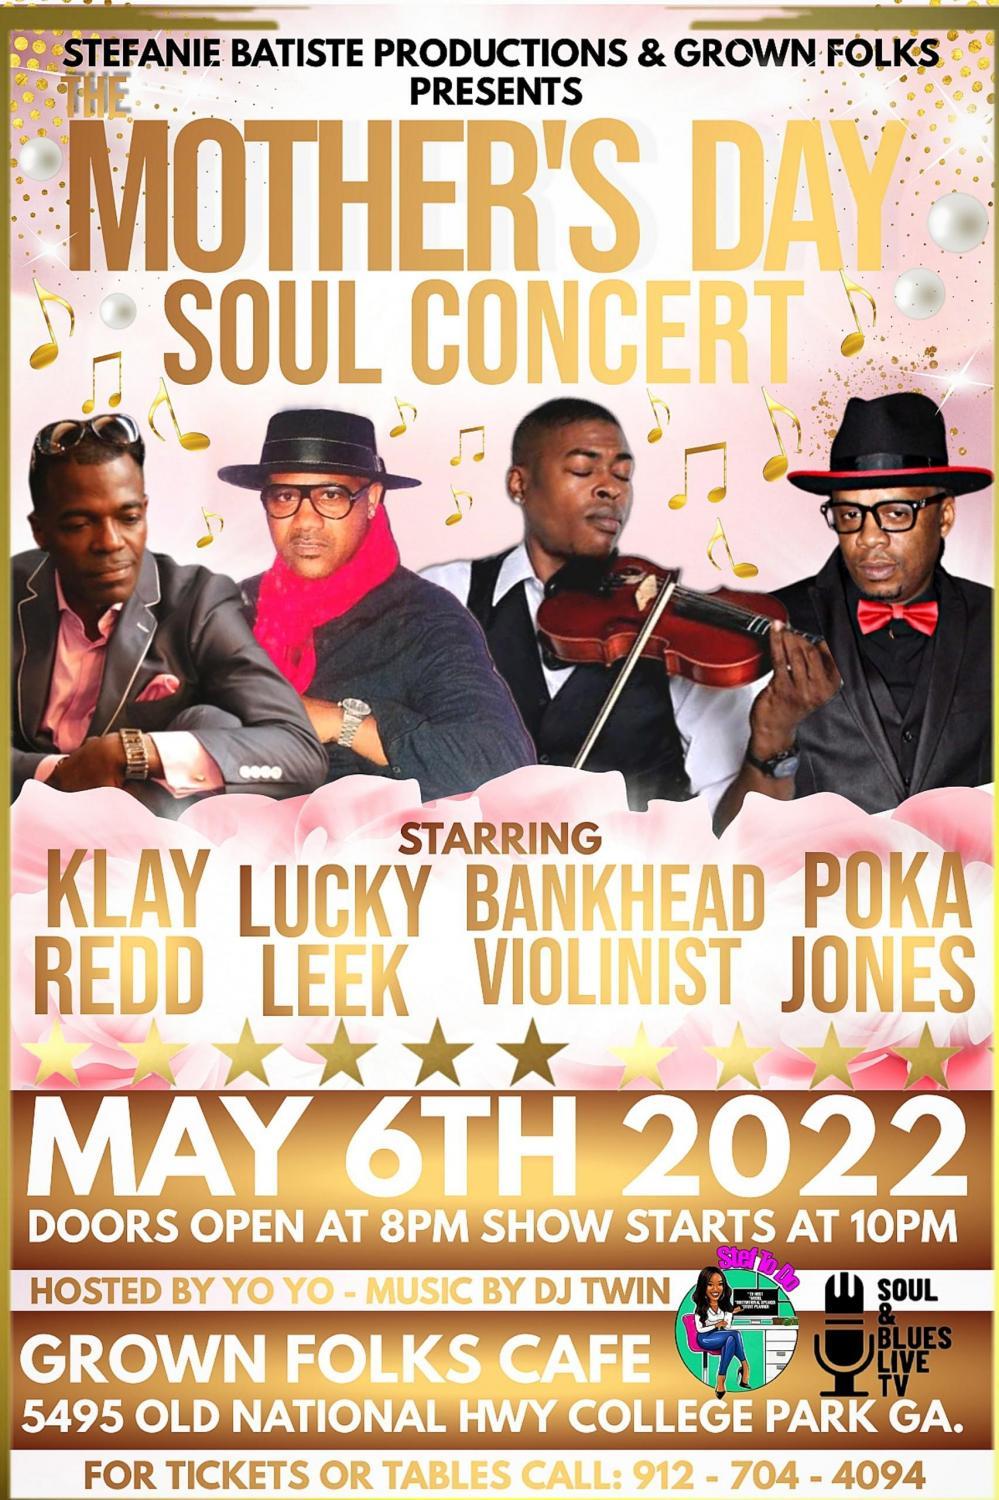 MOTHER'S DAY SOUL CONCERT